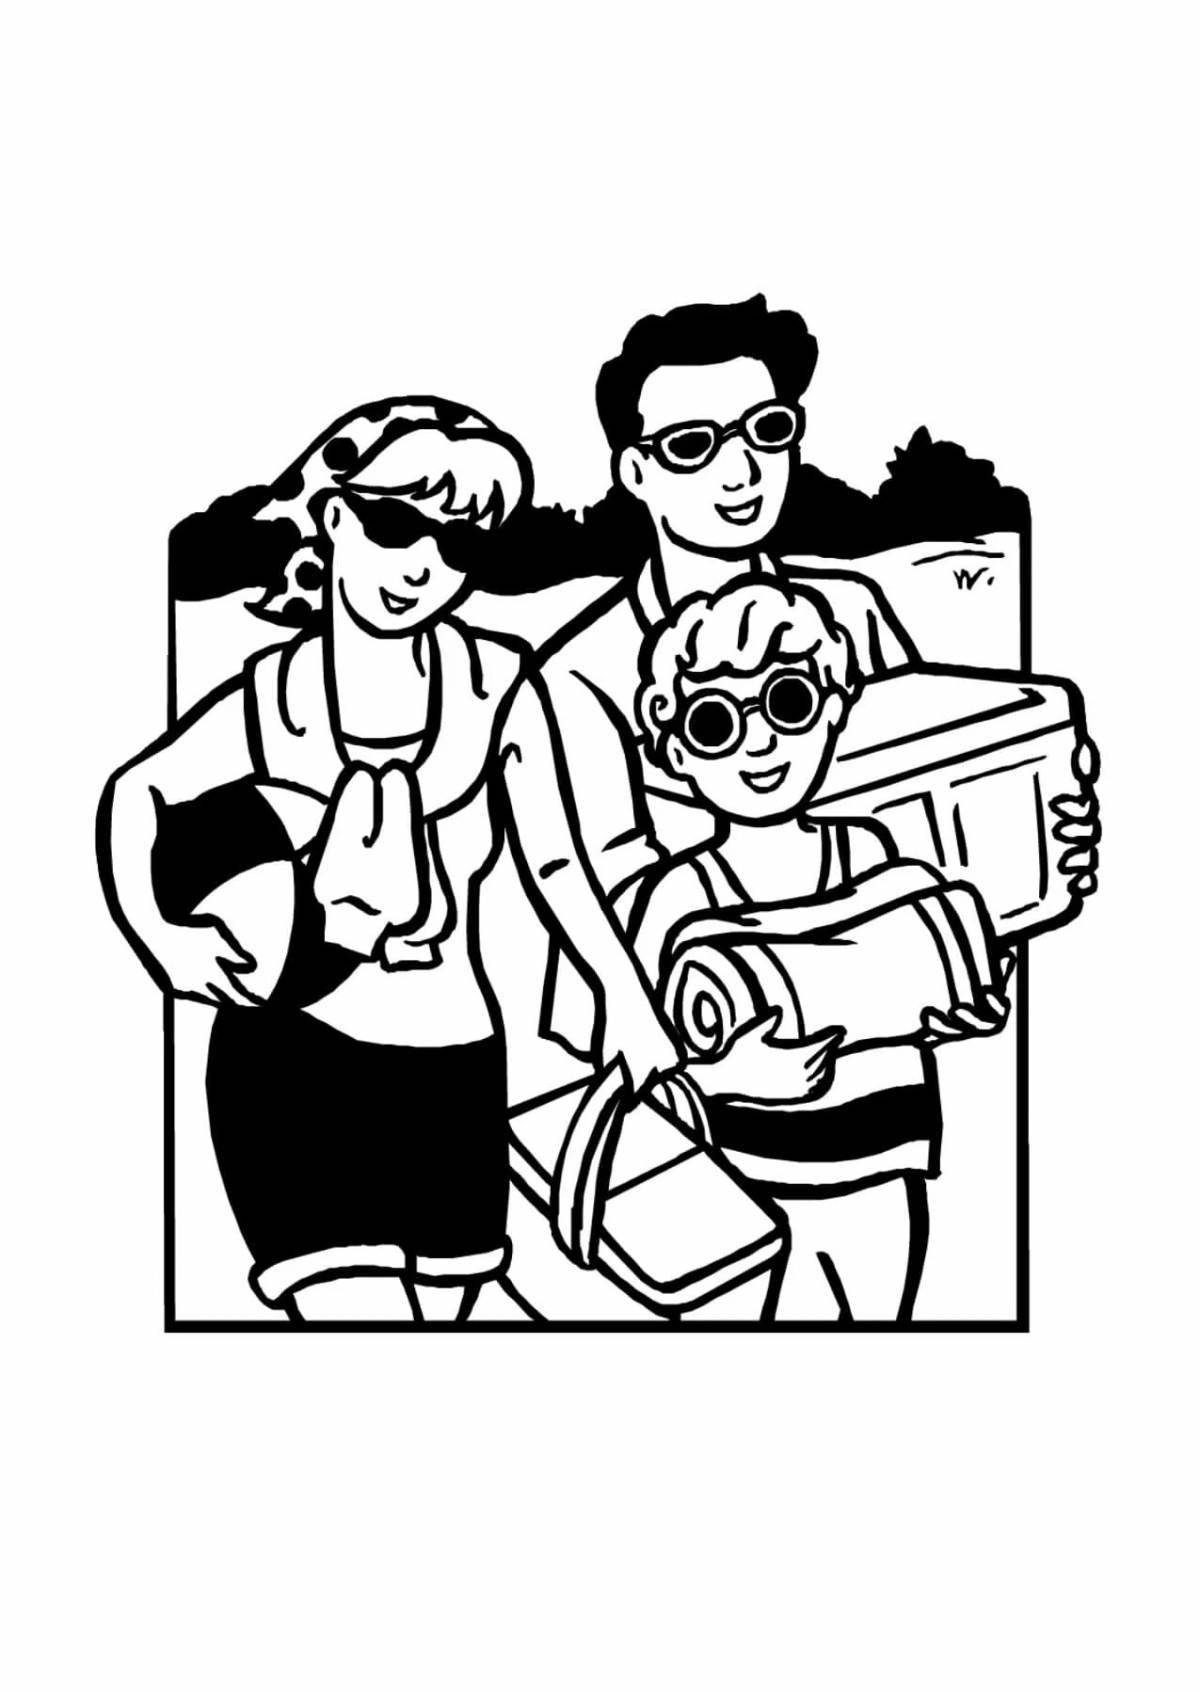 Busy family on vacation coloring book